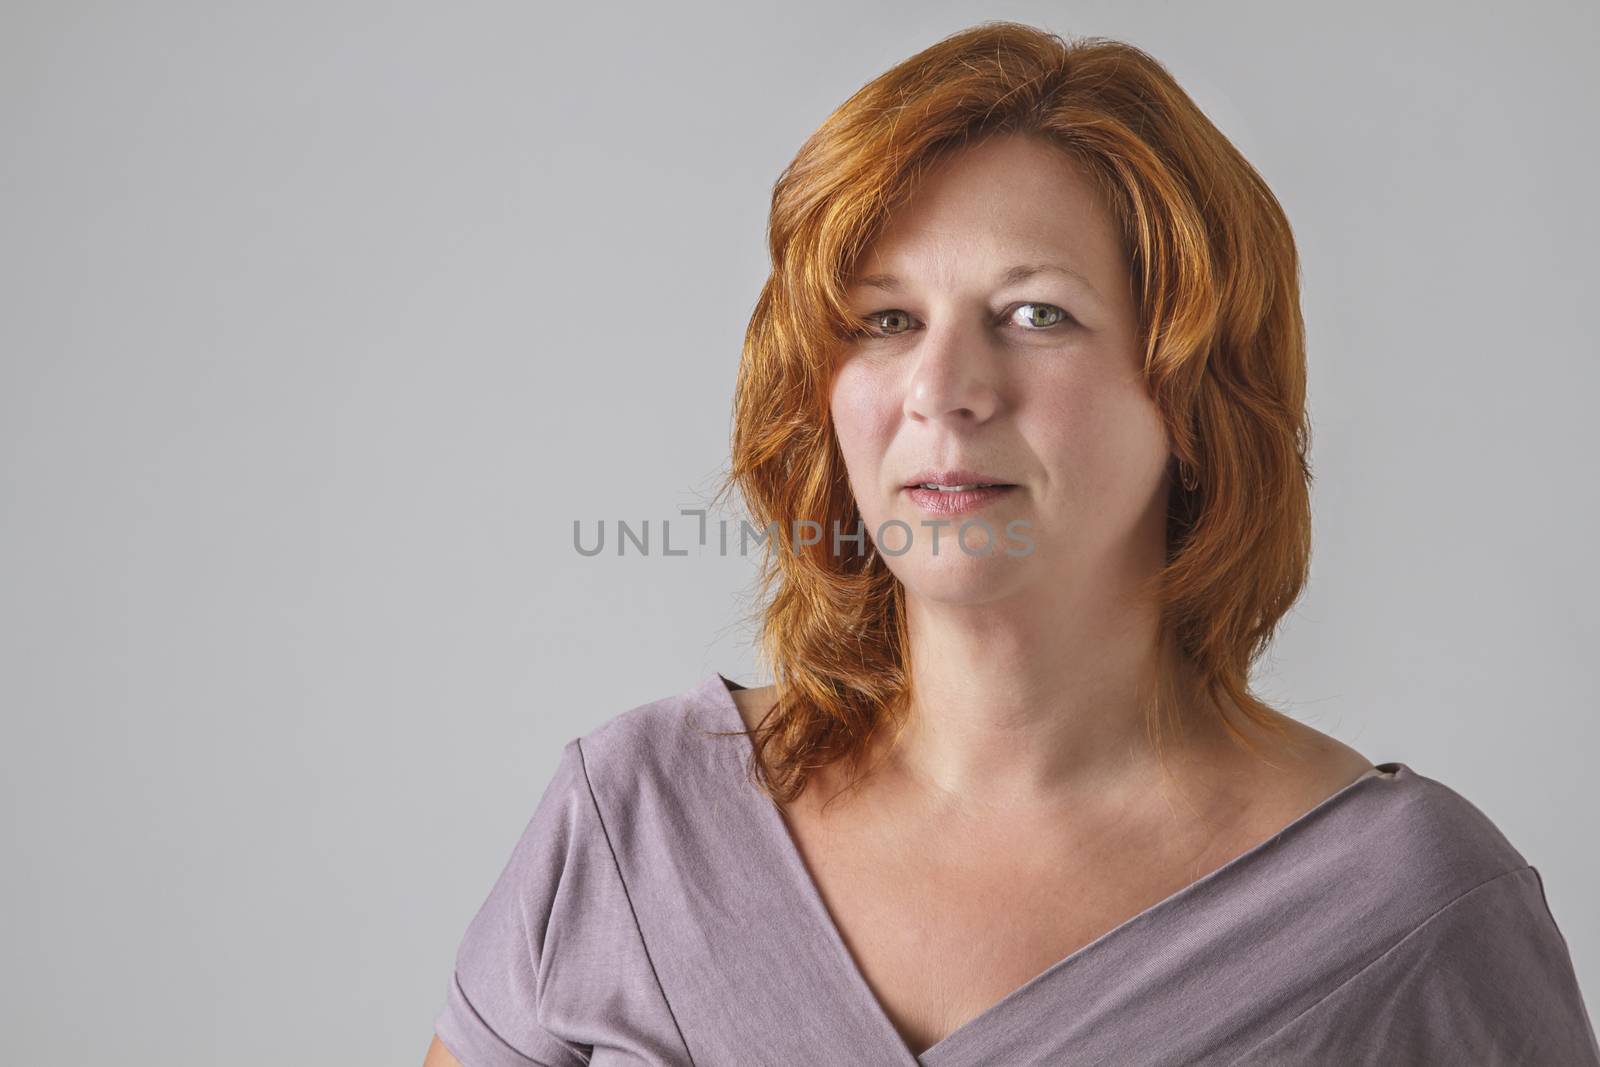 beautiful woman in her forties with red hair, wearing a grey shirt